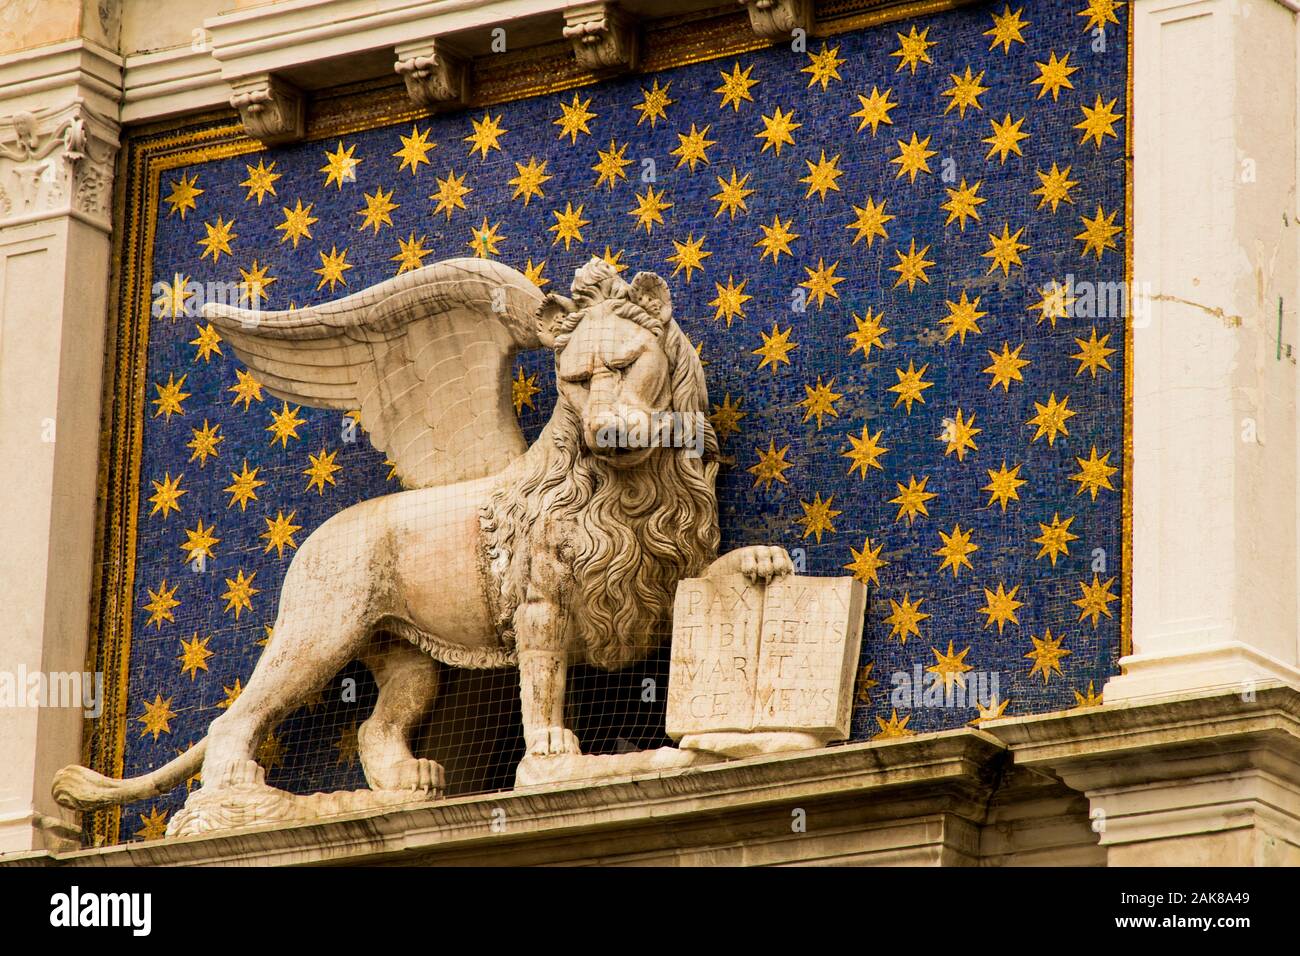 The Lion of St Mark also known as the Winged Lion on the Torre dell'Orologio is a symbol of Venice Italy Stock Photo